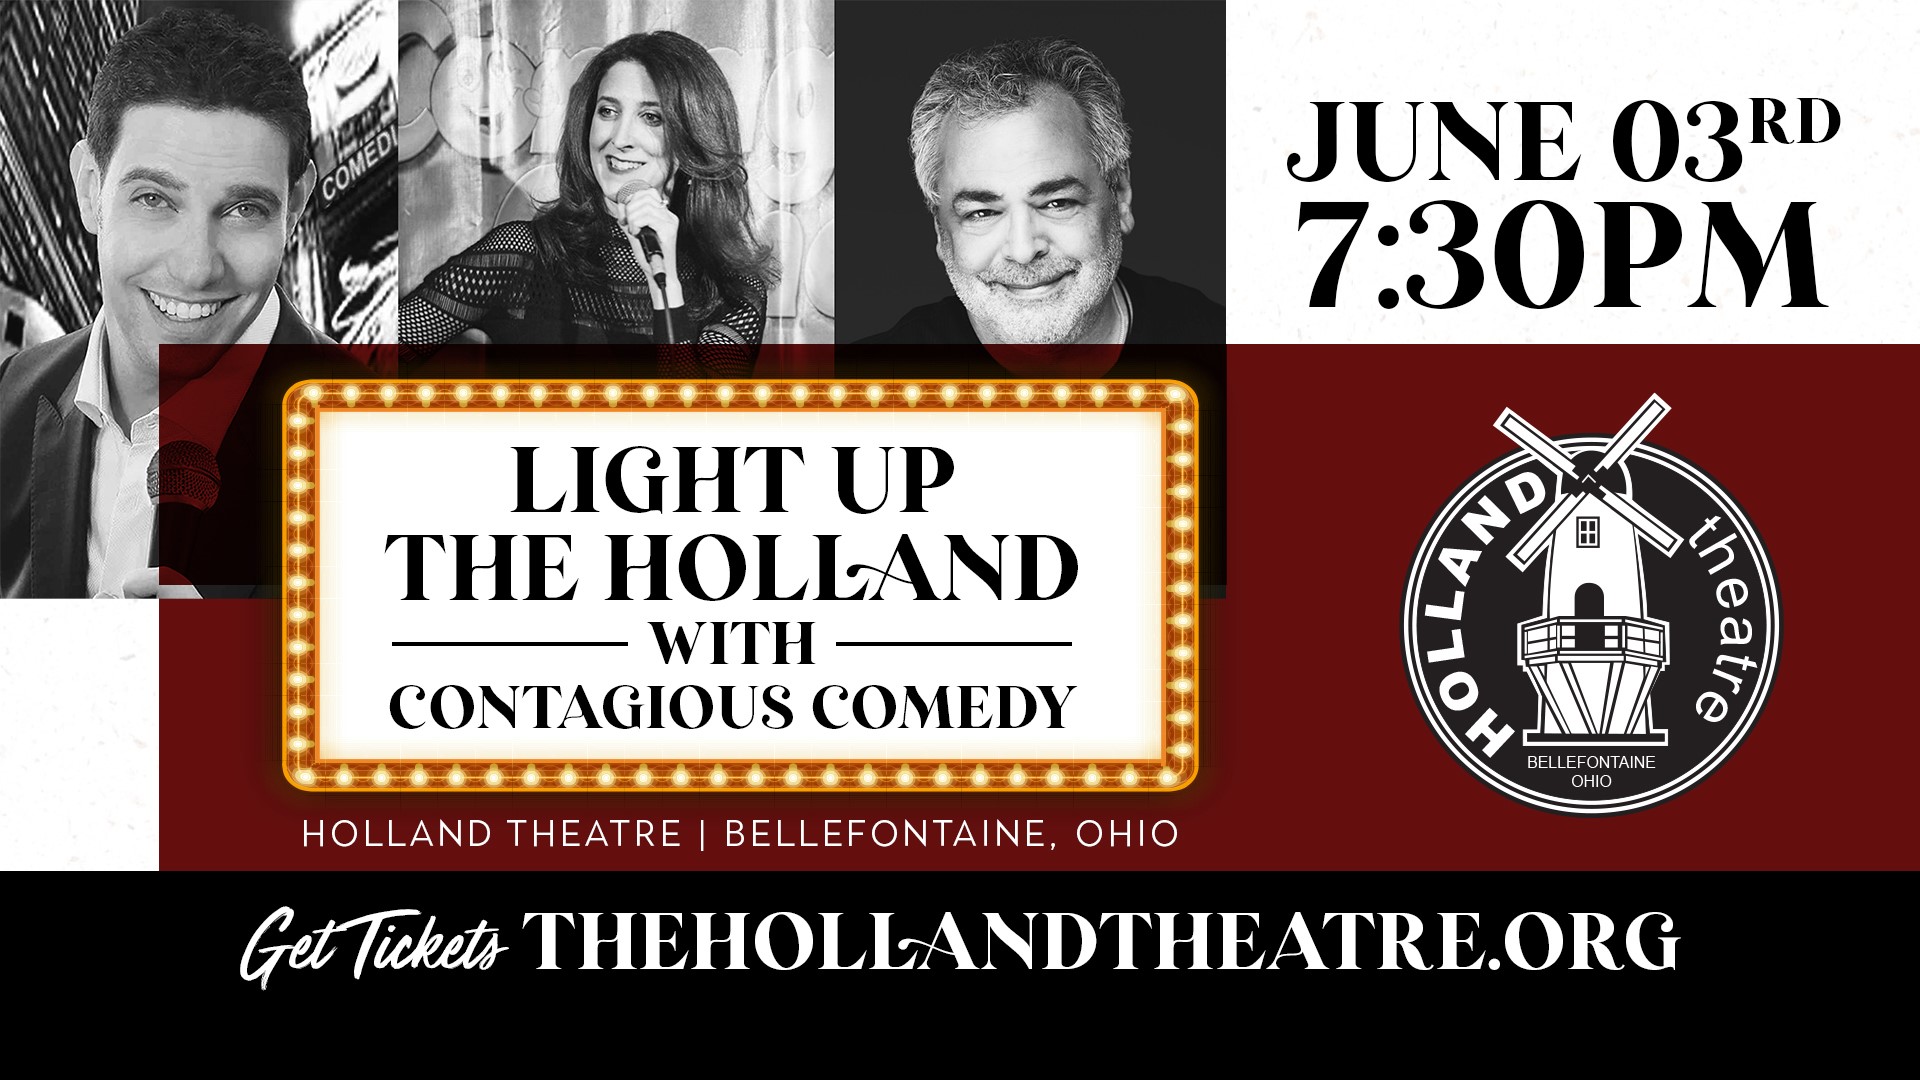 Light Up the Holland With Contagious Comedy